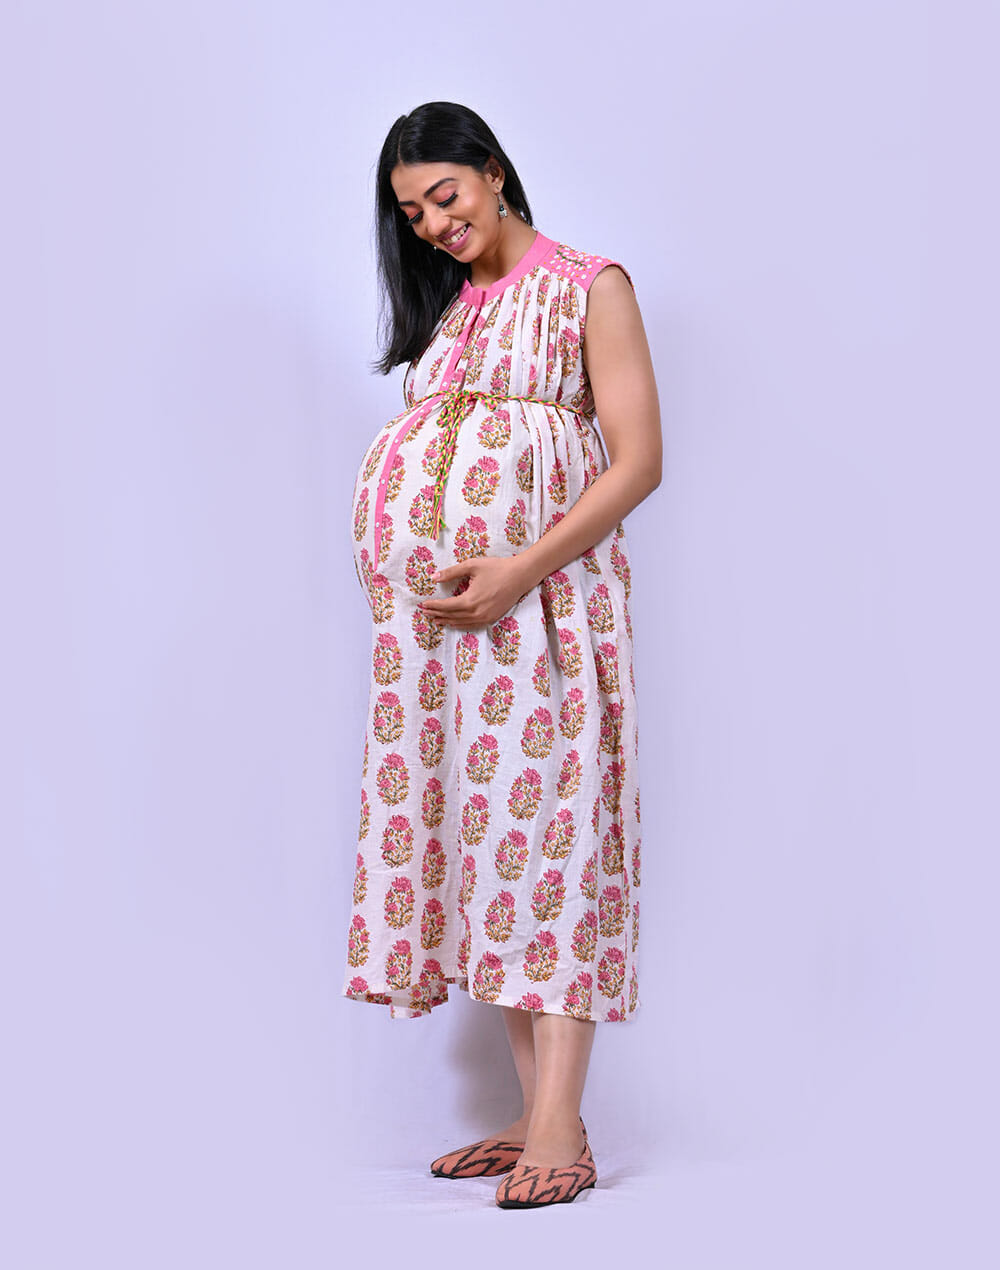 Maternity Trousers - Buy Maternity Trousers online in India